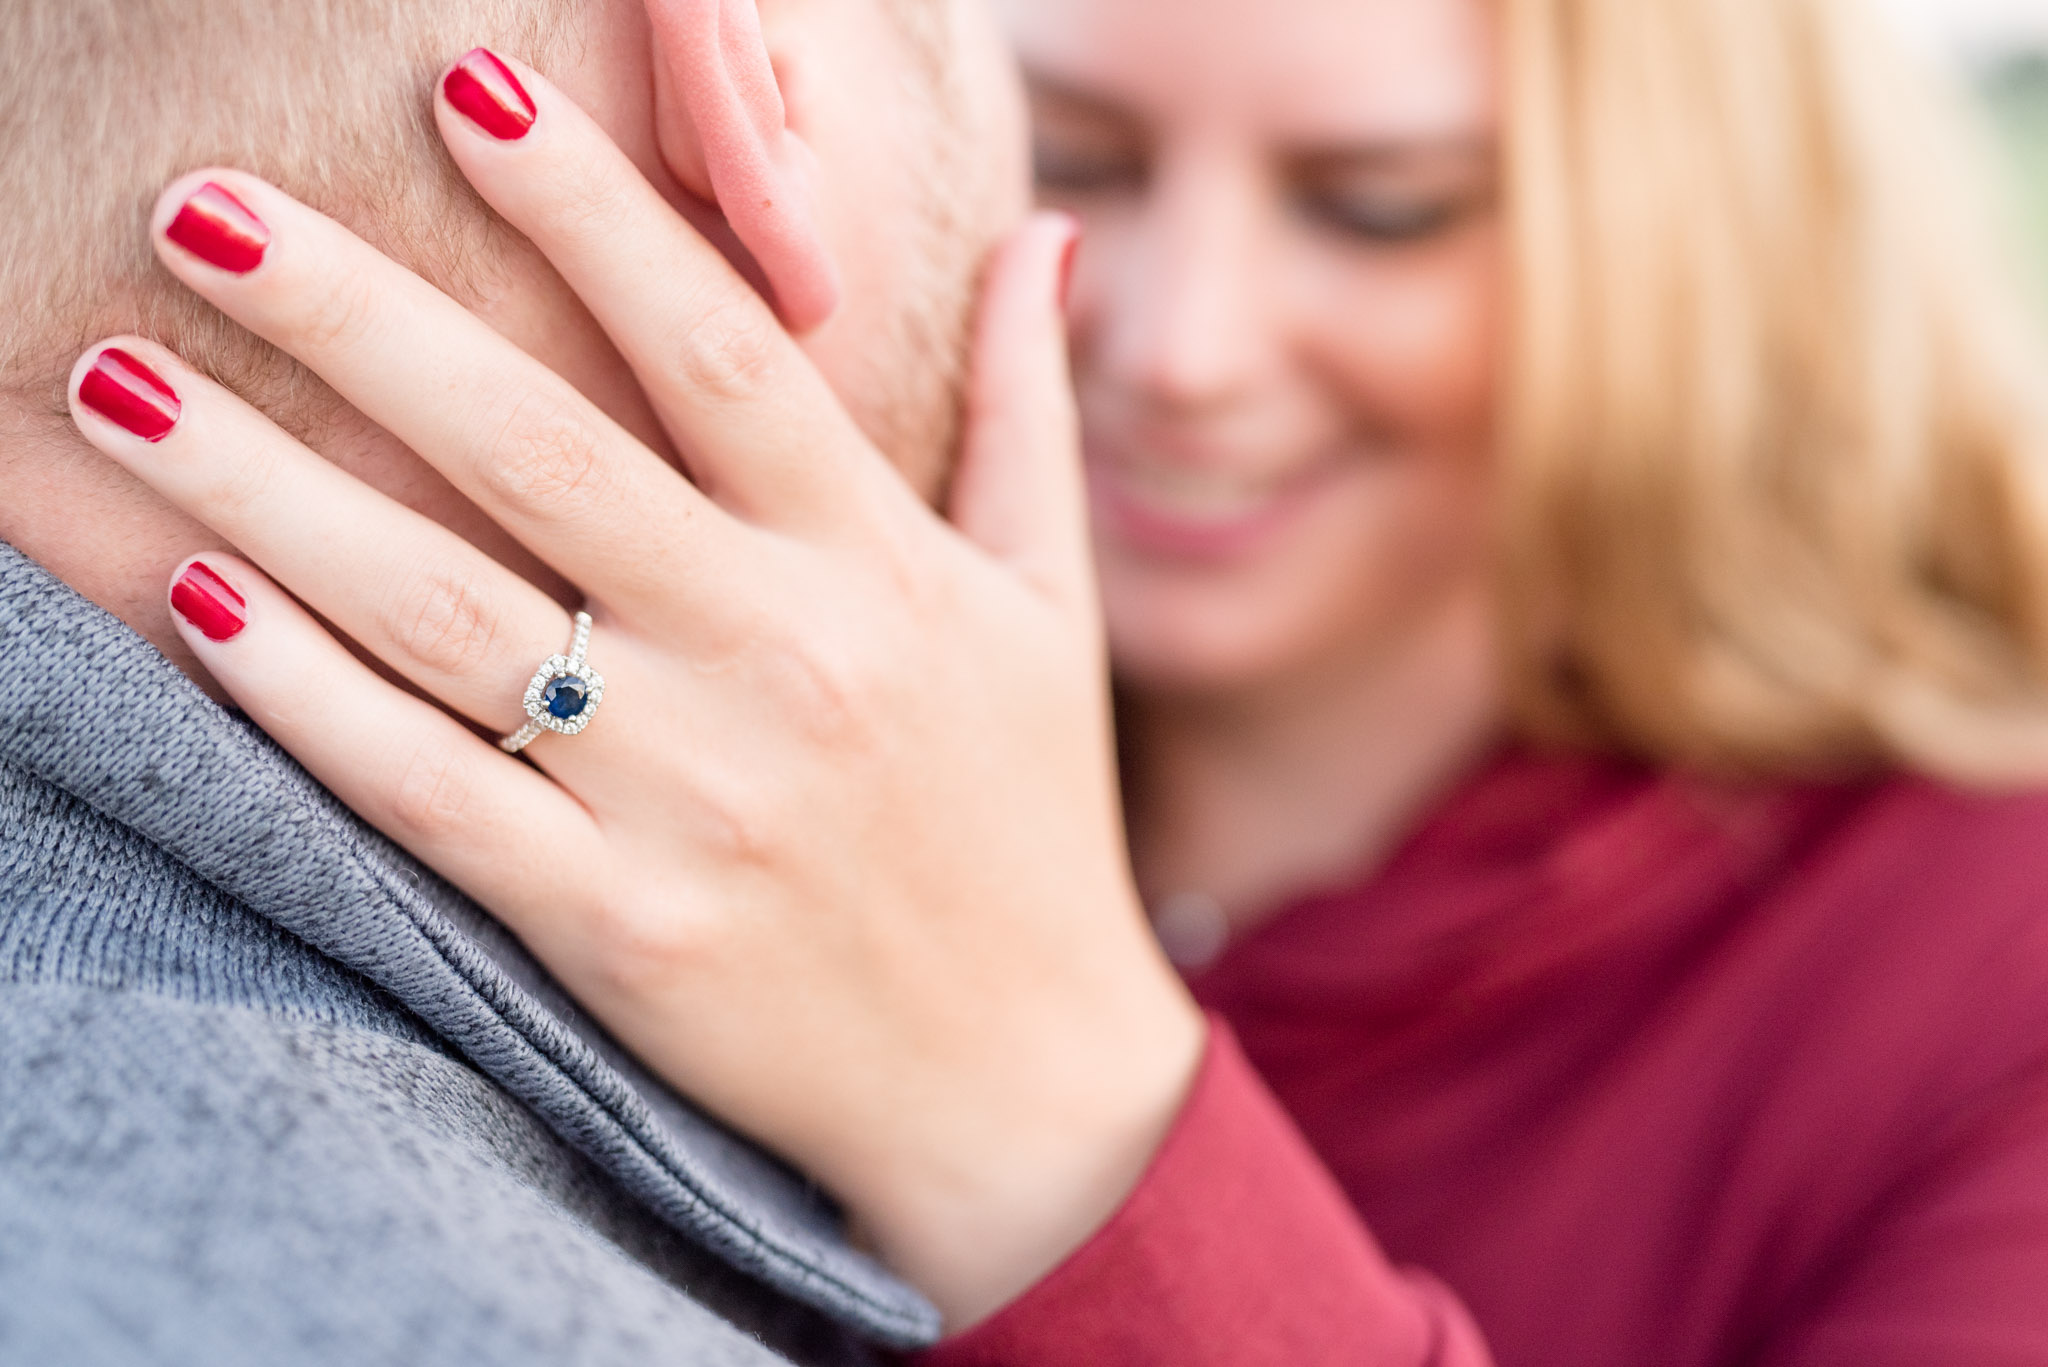 Engagement ring on bride's hand.